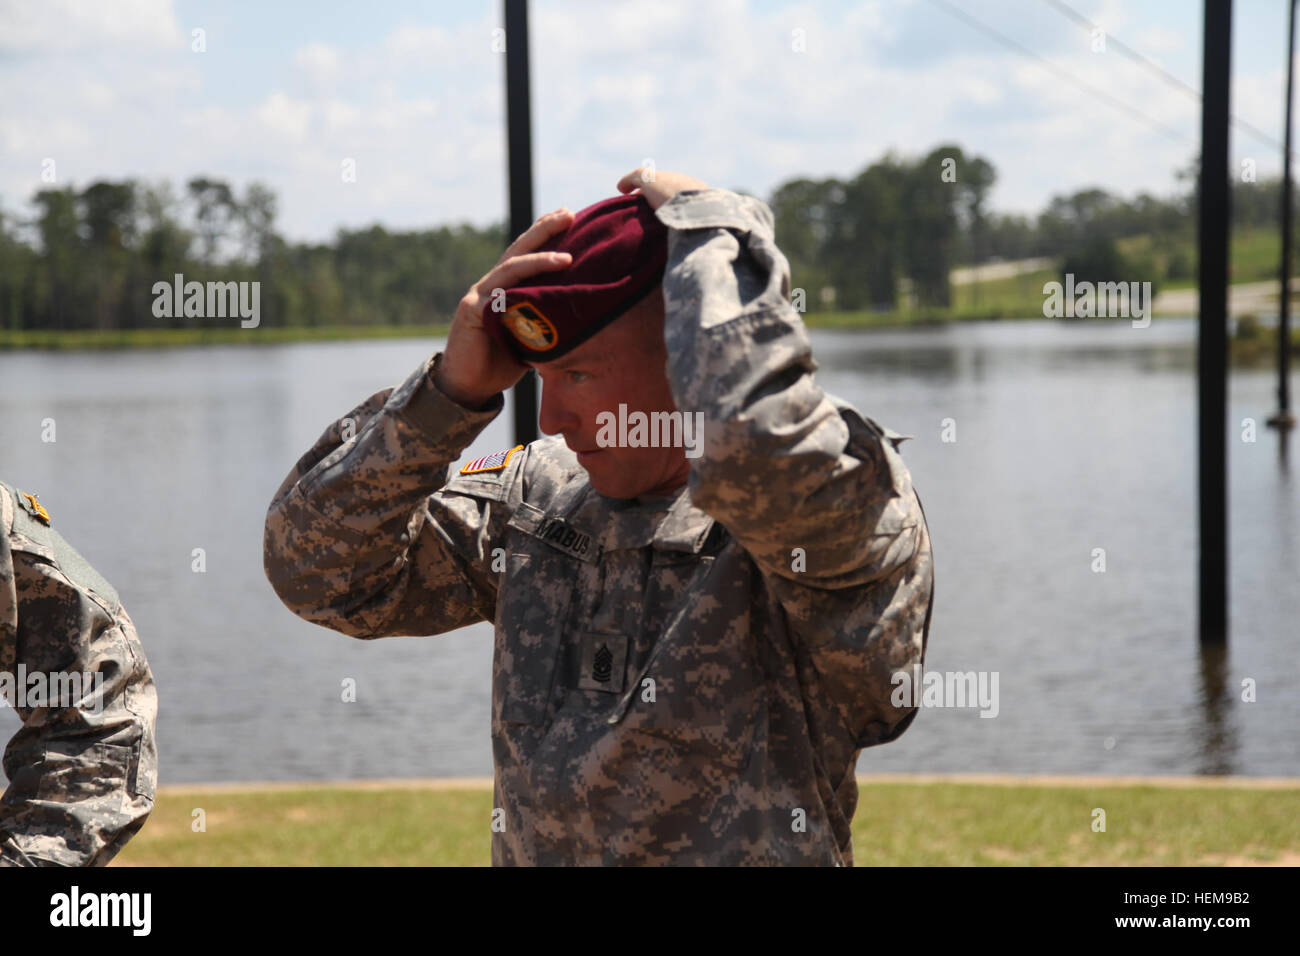 Command Sgt. Maj. Mabus dons his maroon beret, rank, and all patches and proclaimed 'I'm back!' signaling his readiness to return to the unit and Fort Bragg. CSM Mabus Ranger School Graduation 120824-A-MY599-138 Stock Photo